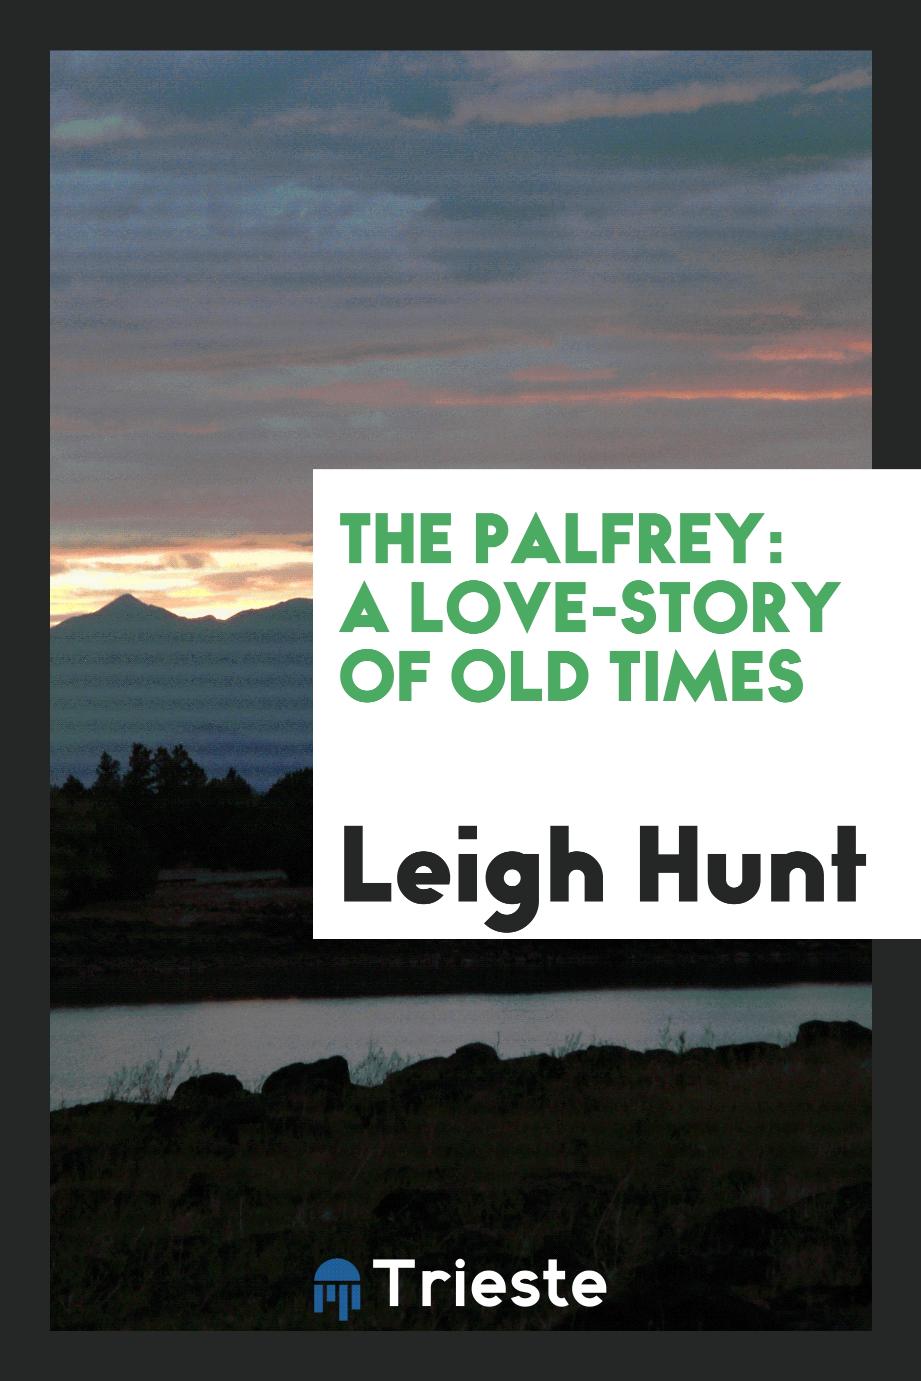 The Palfrey: A Love-story of Old Times